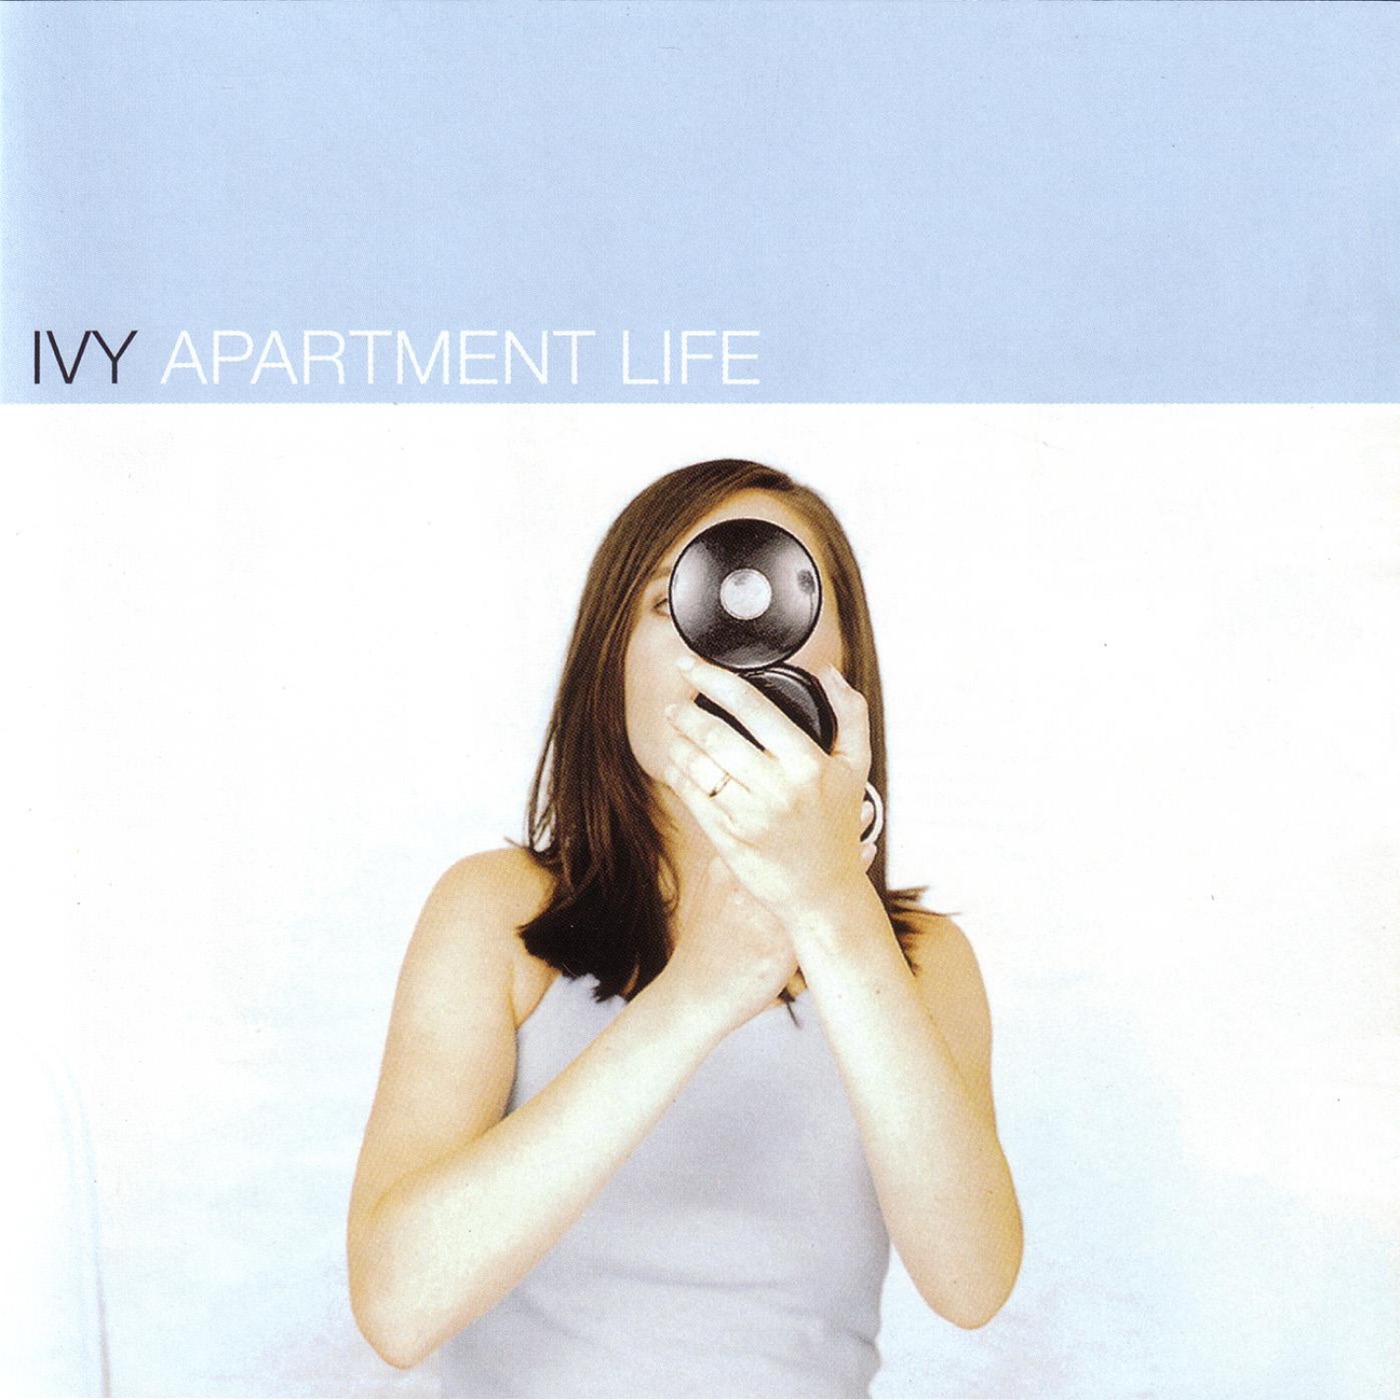 Apartment Life by Ivy